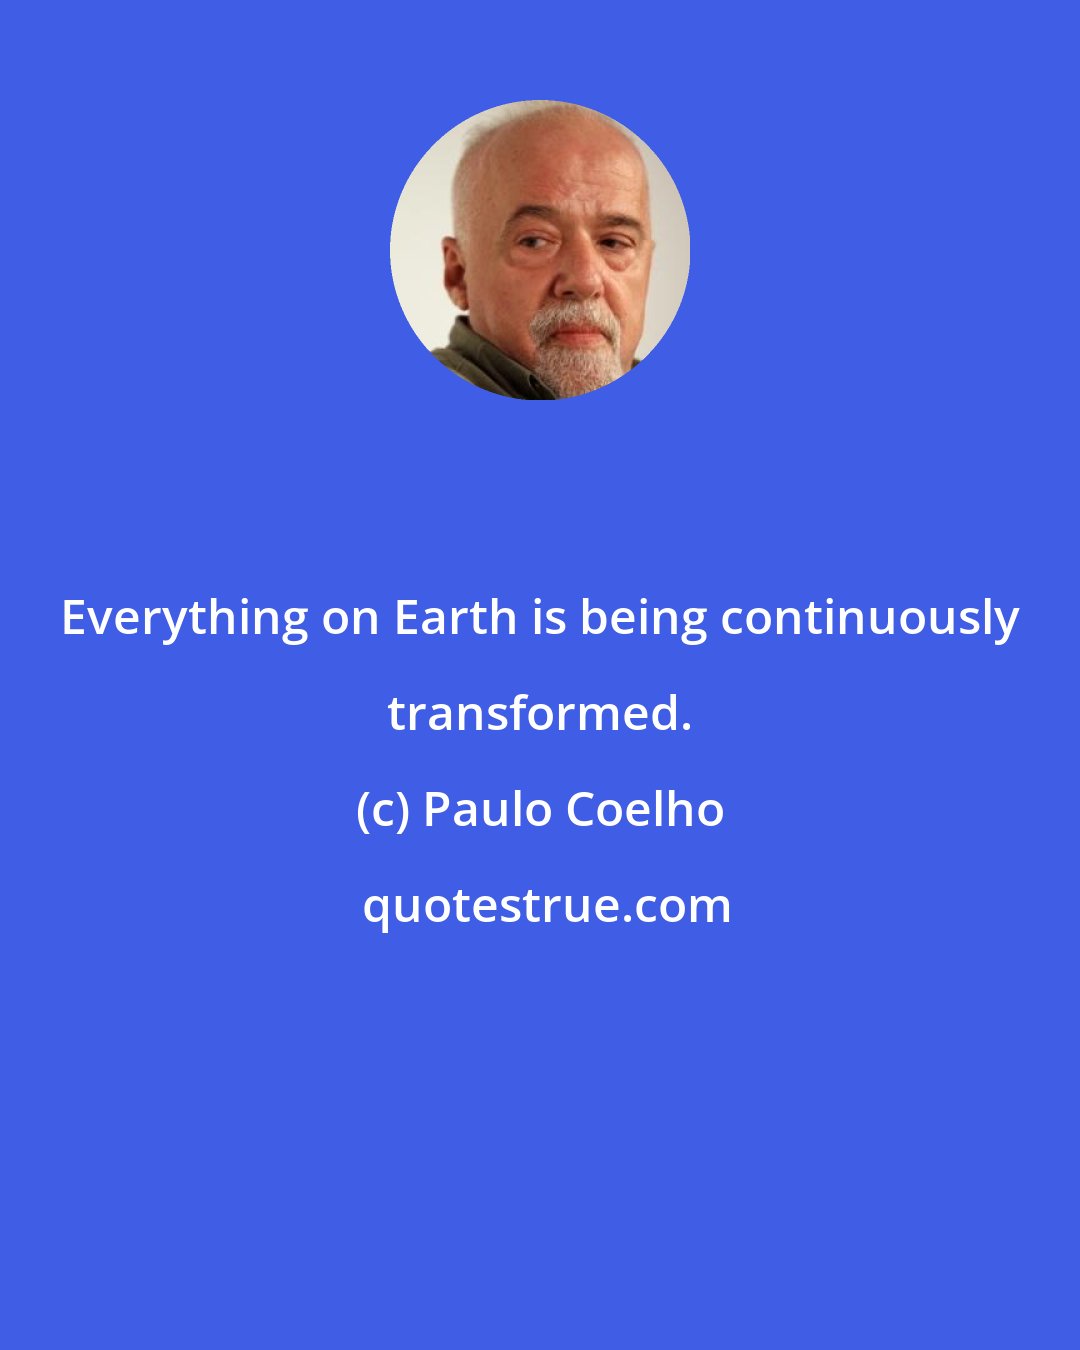 Paulo Coelho: Everything on Earth is being continuously transformed.